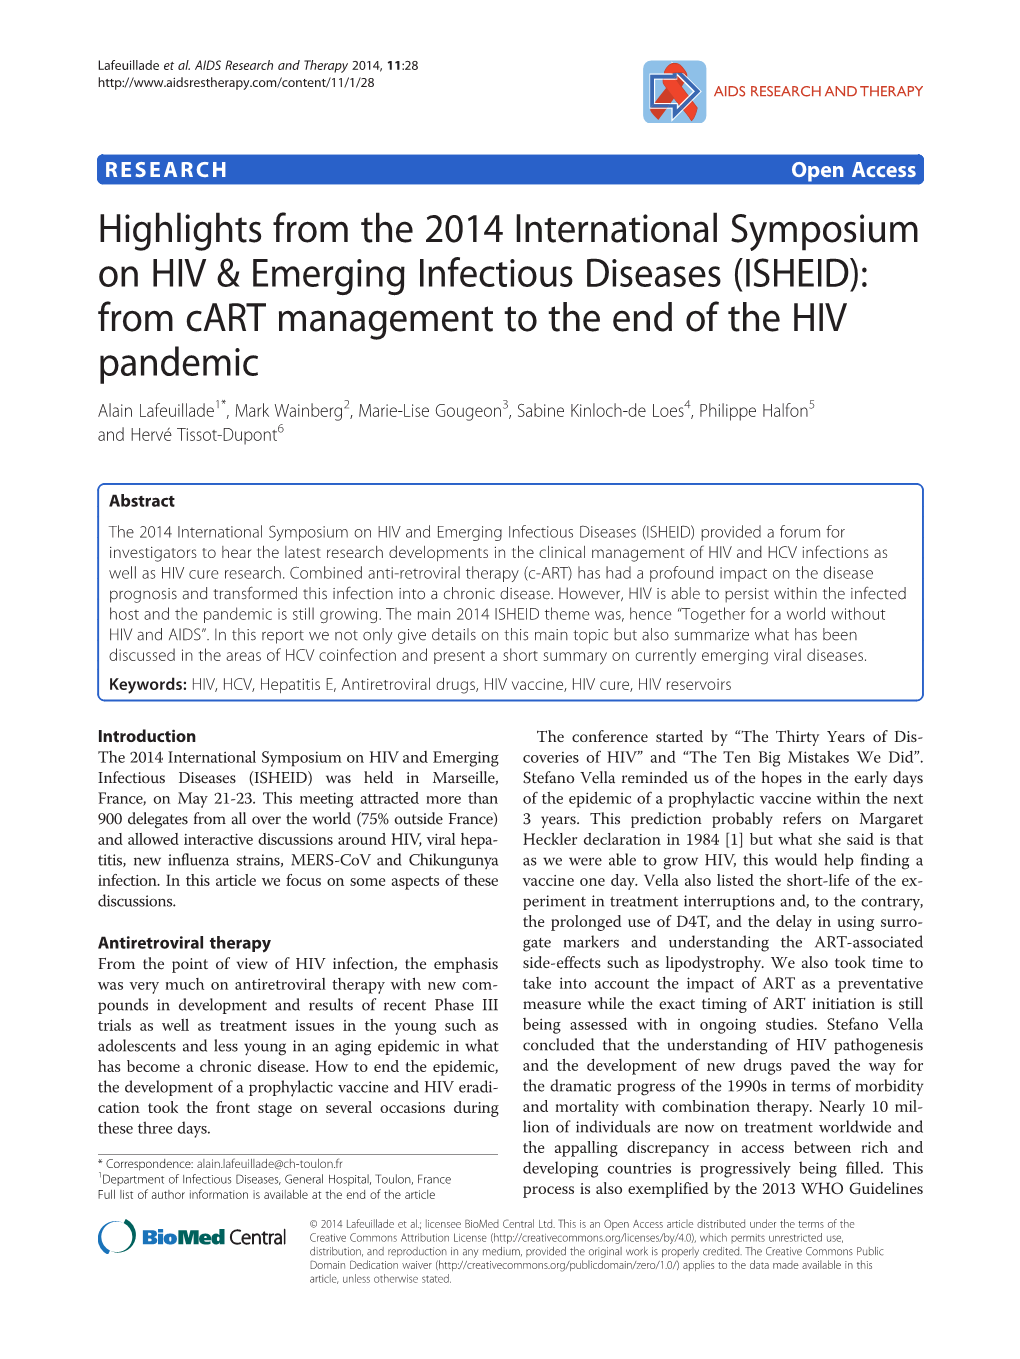 Highlights from the 2014 International Symposium on HIV